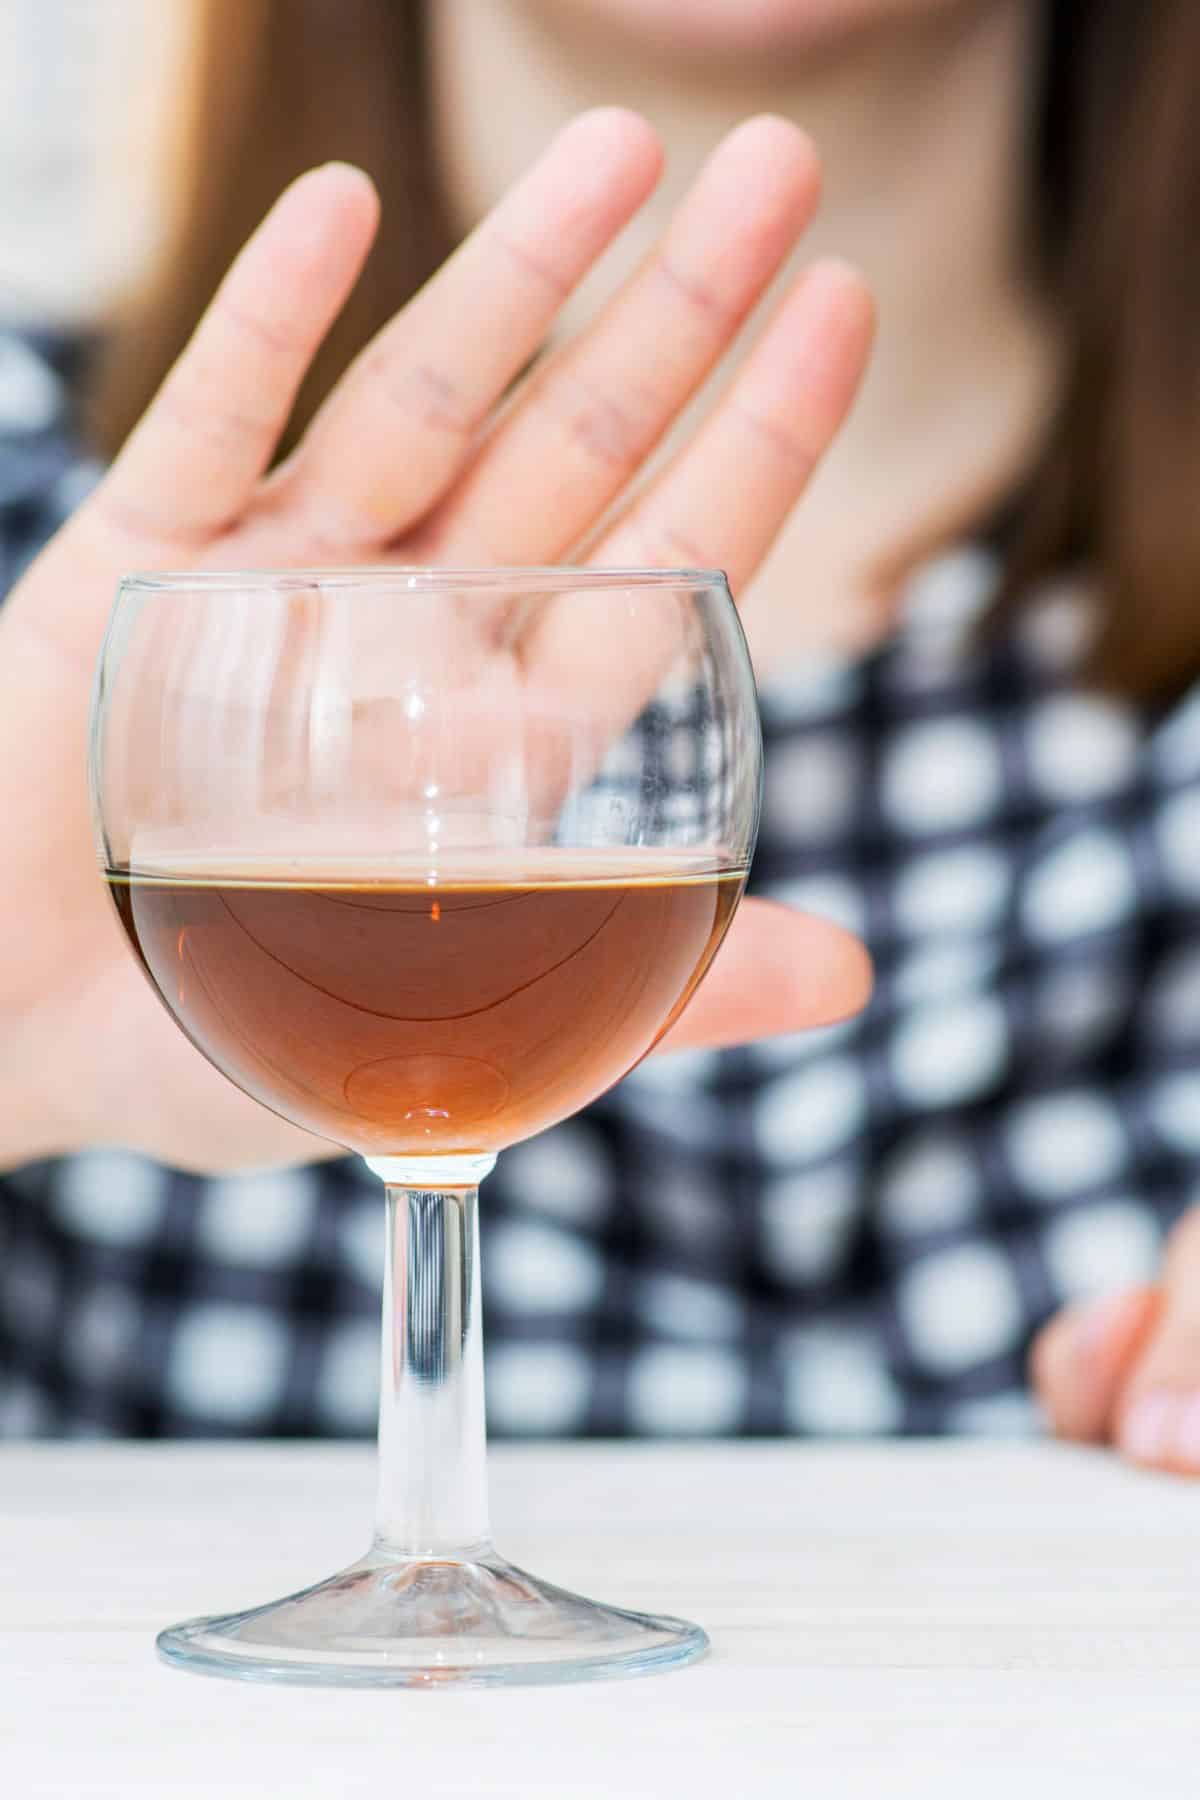 a woman holding her hand out in front of an alcoholic beverage.